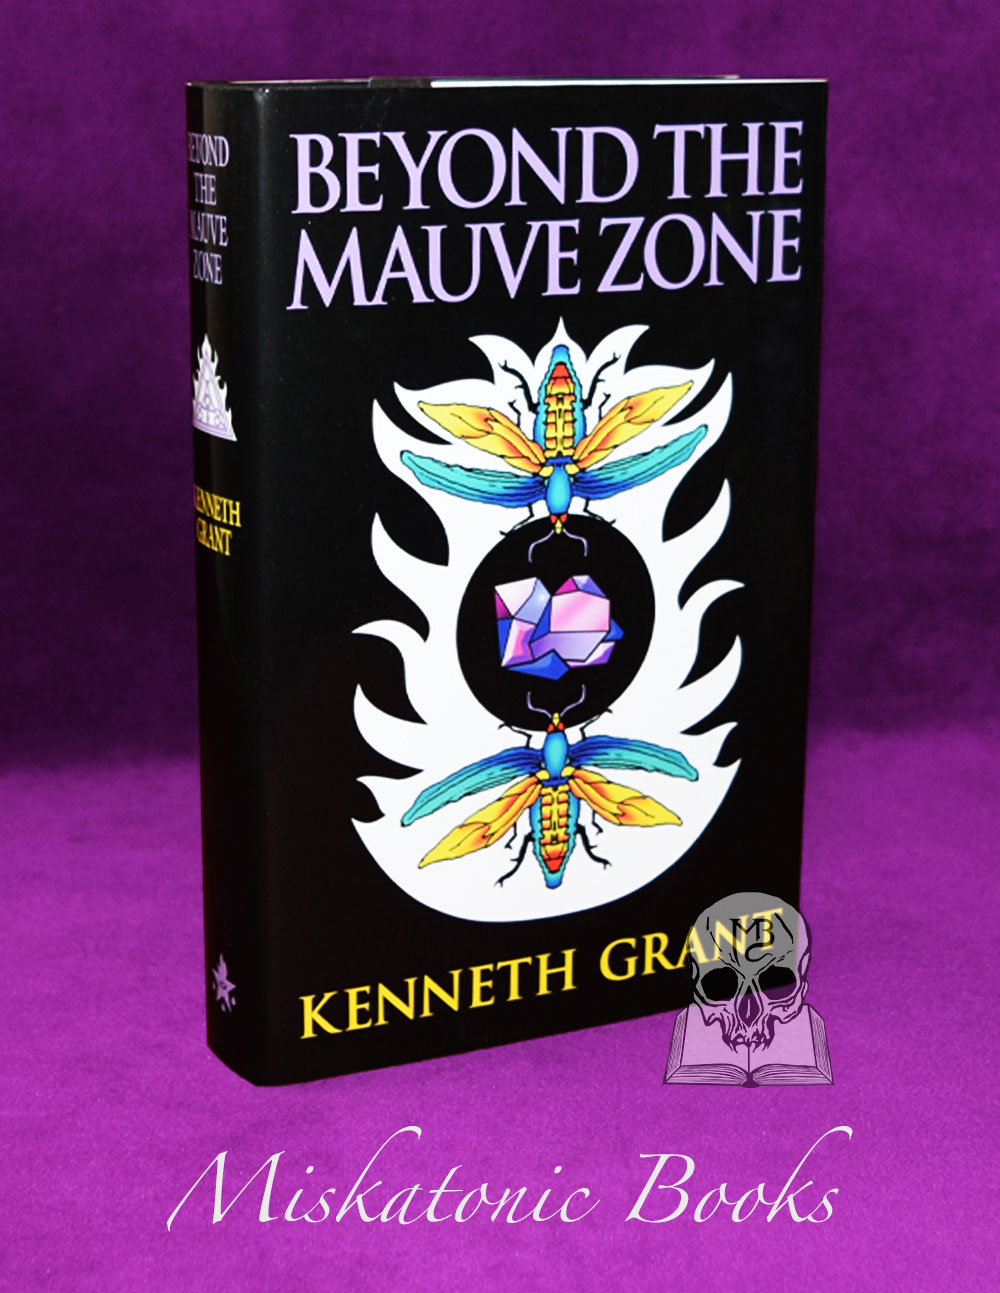 Hardcover Starfire Publishing Beyond The Mauve Zone - Kenneth Grant 